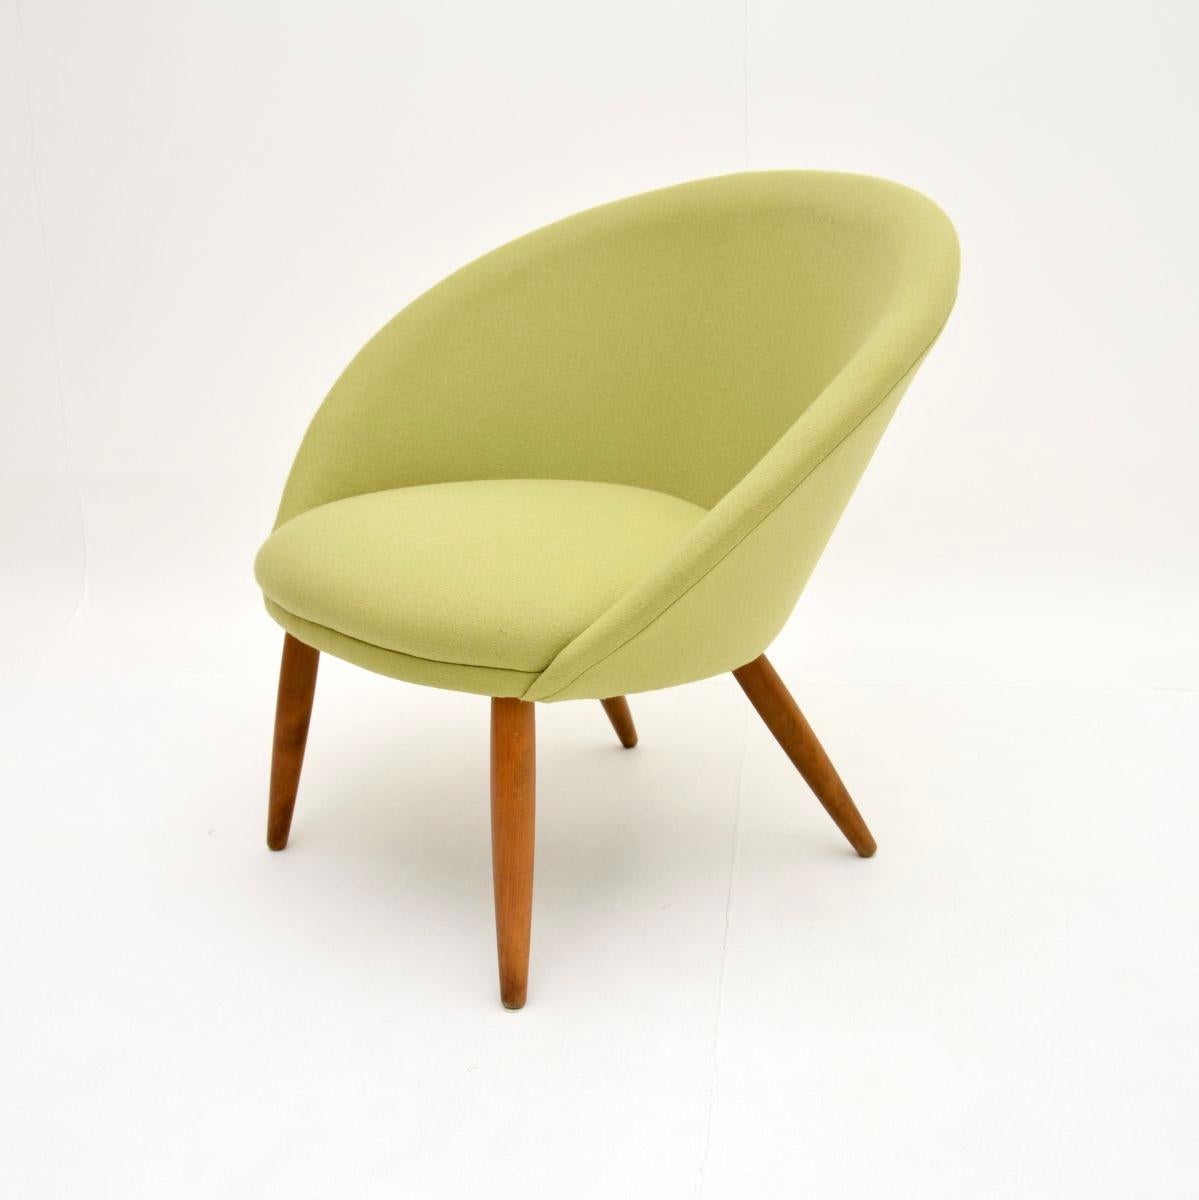 Mid-20th Century Danish Vintage Cocktail Chair For Sale